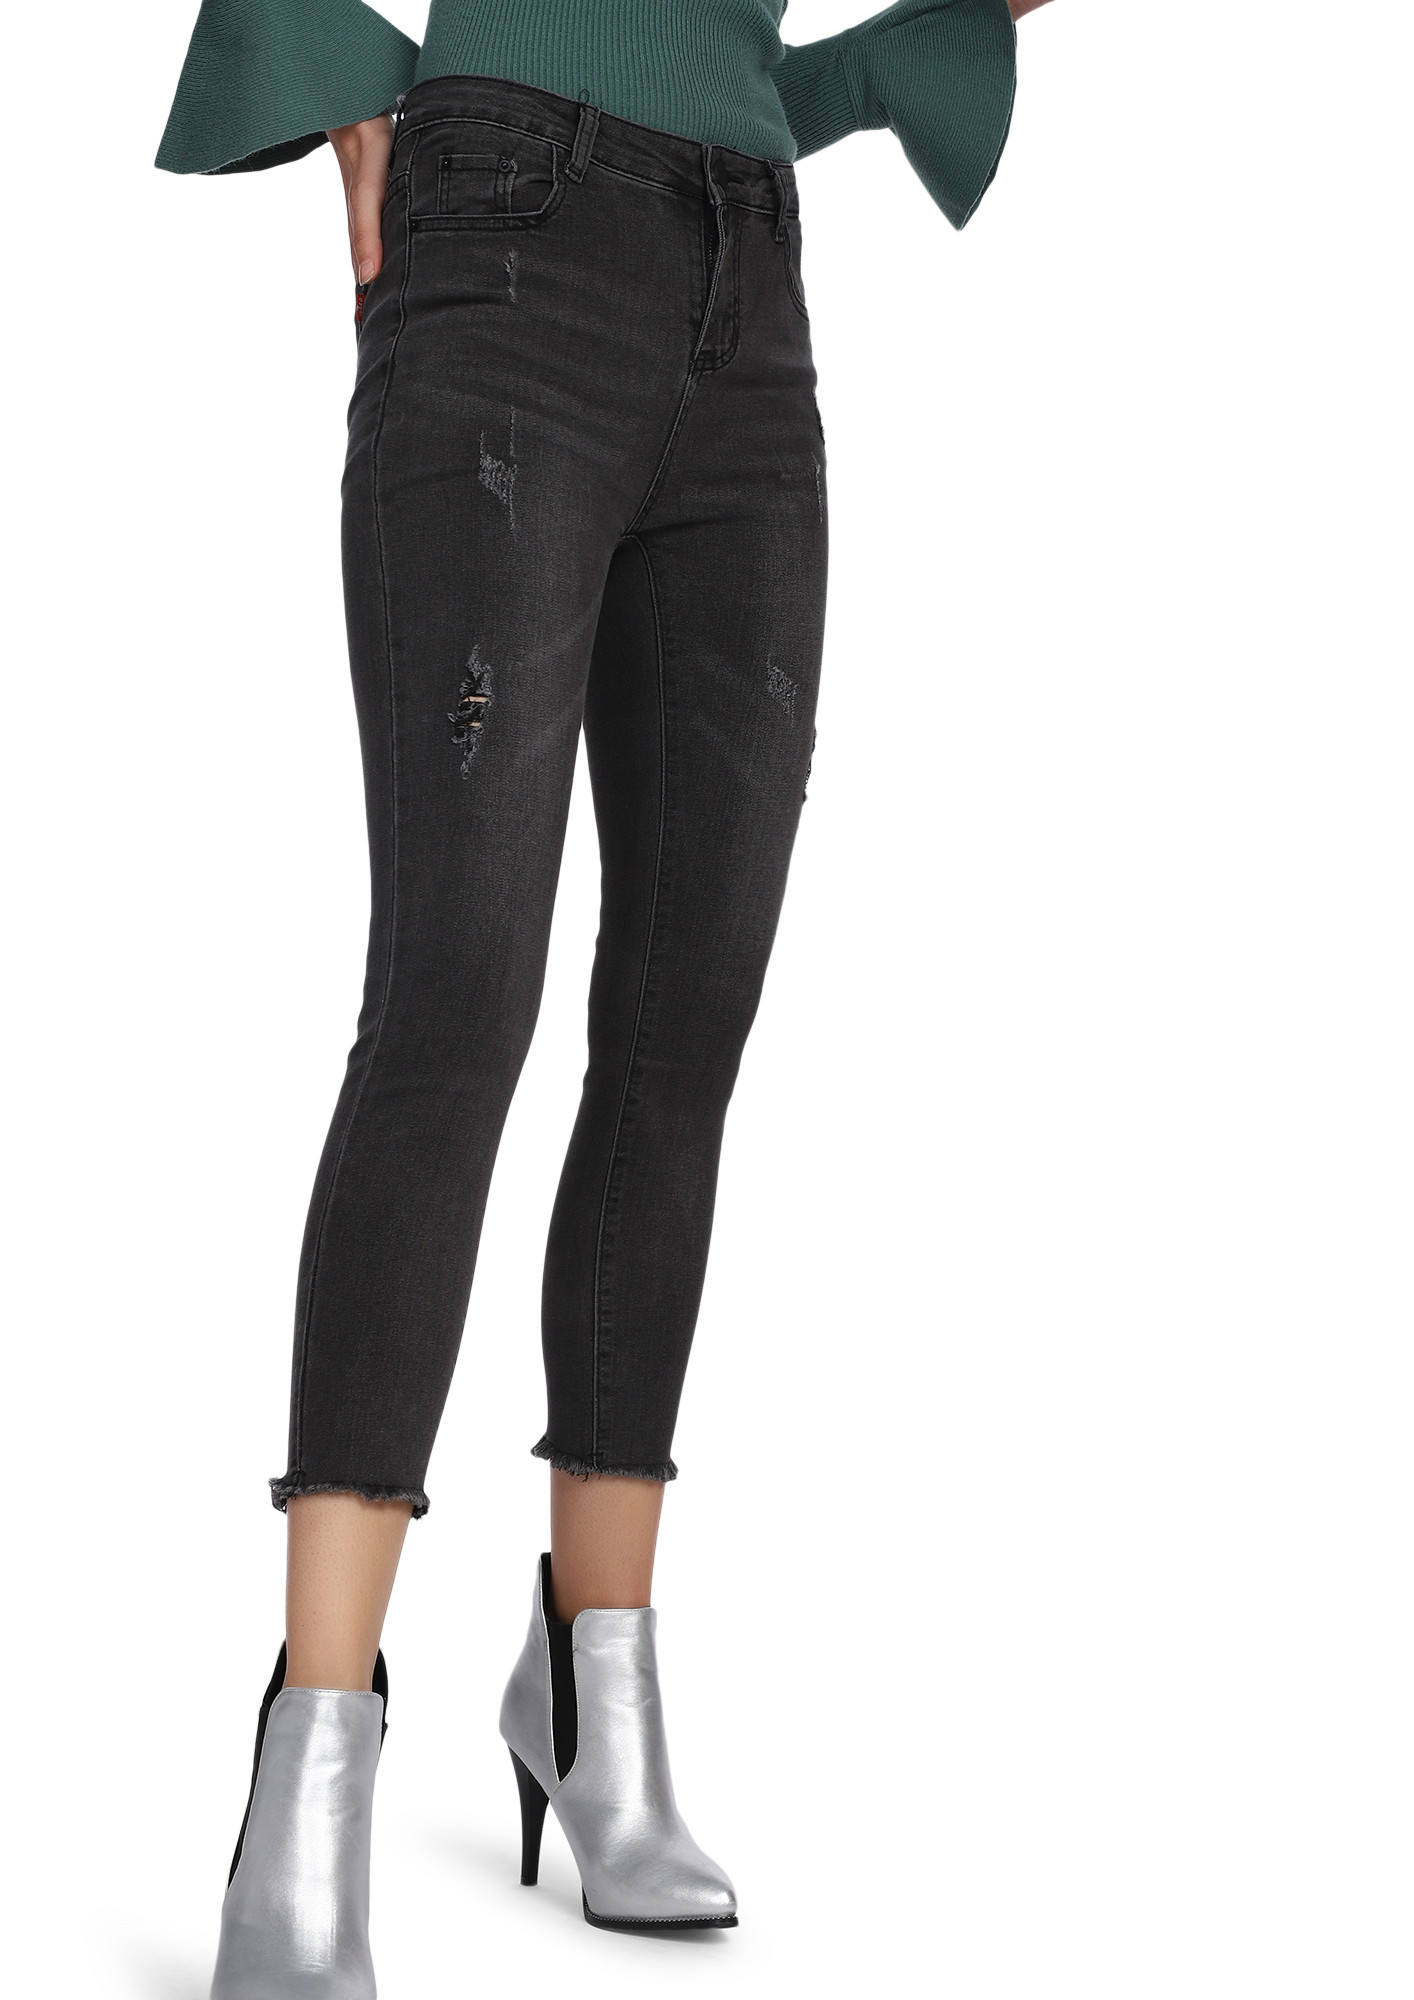 IN A RAW STATE BLACK GREY CROPPED JEANS